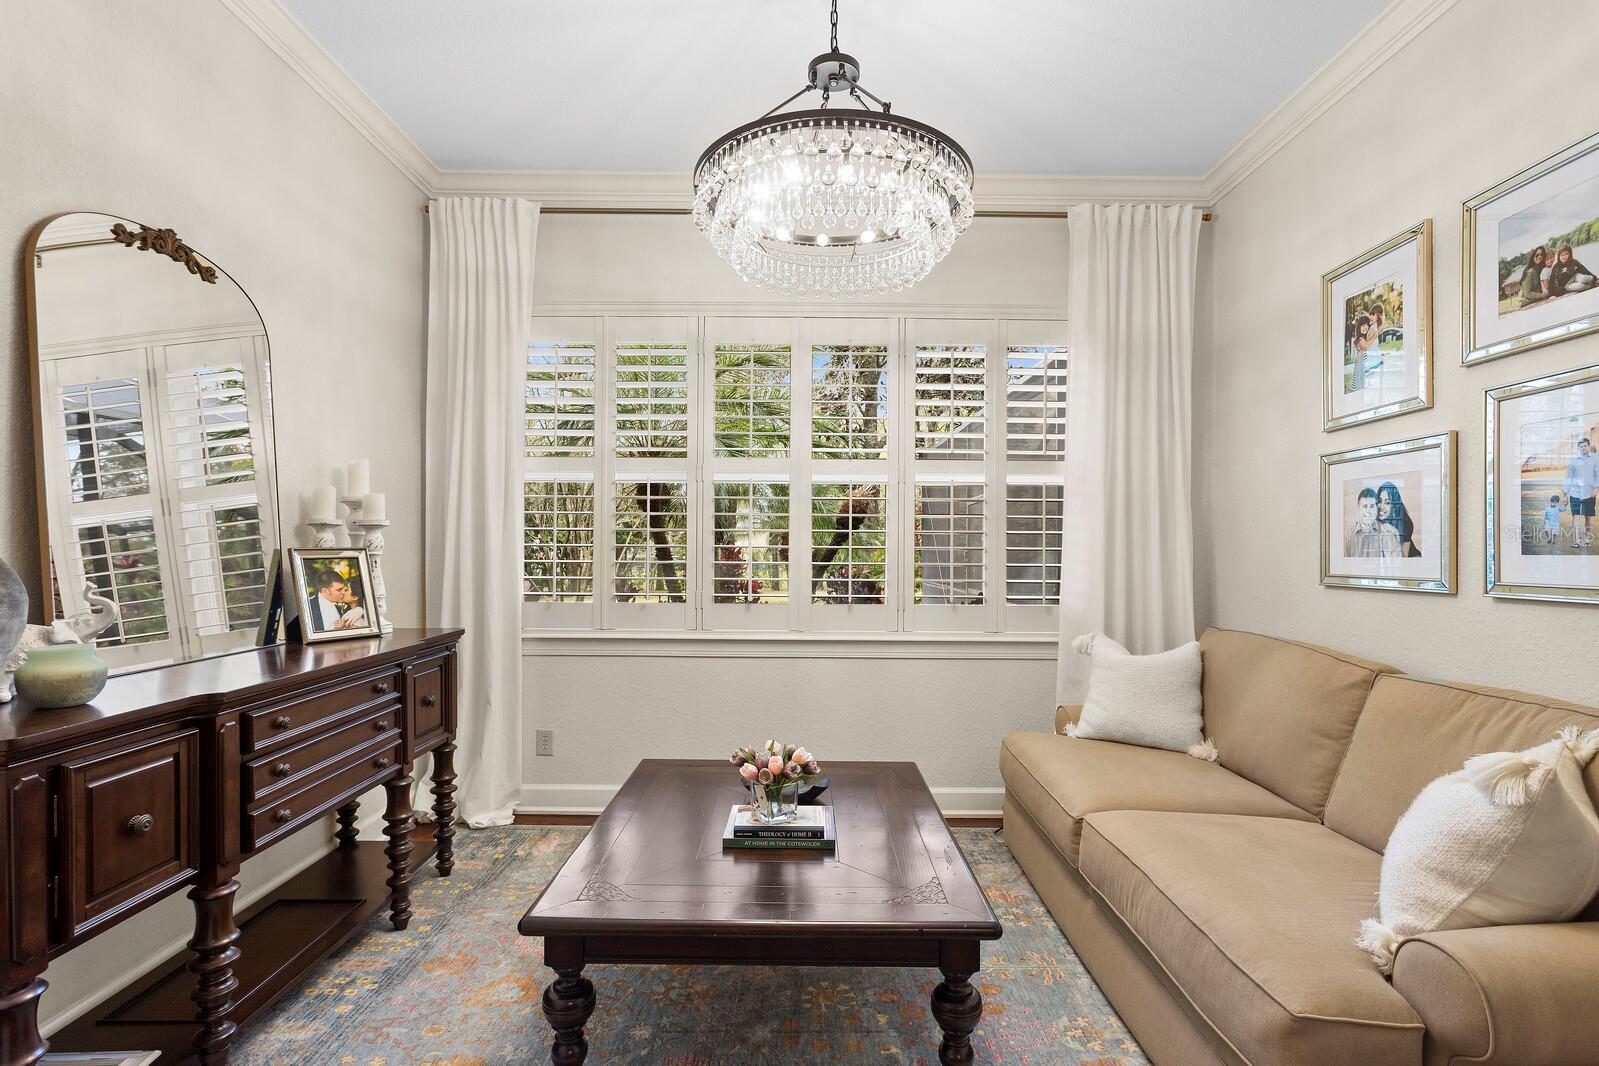 Gorgeous chandelier and plantation shutters!